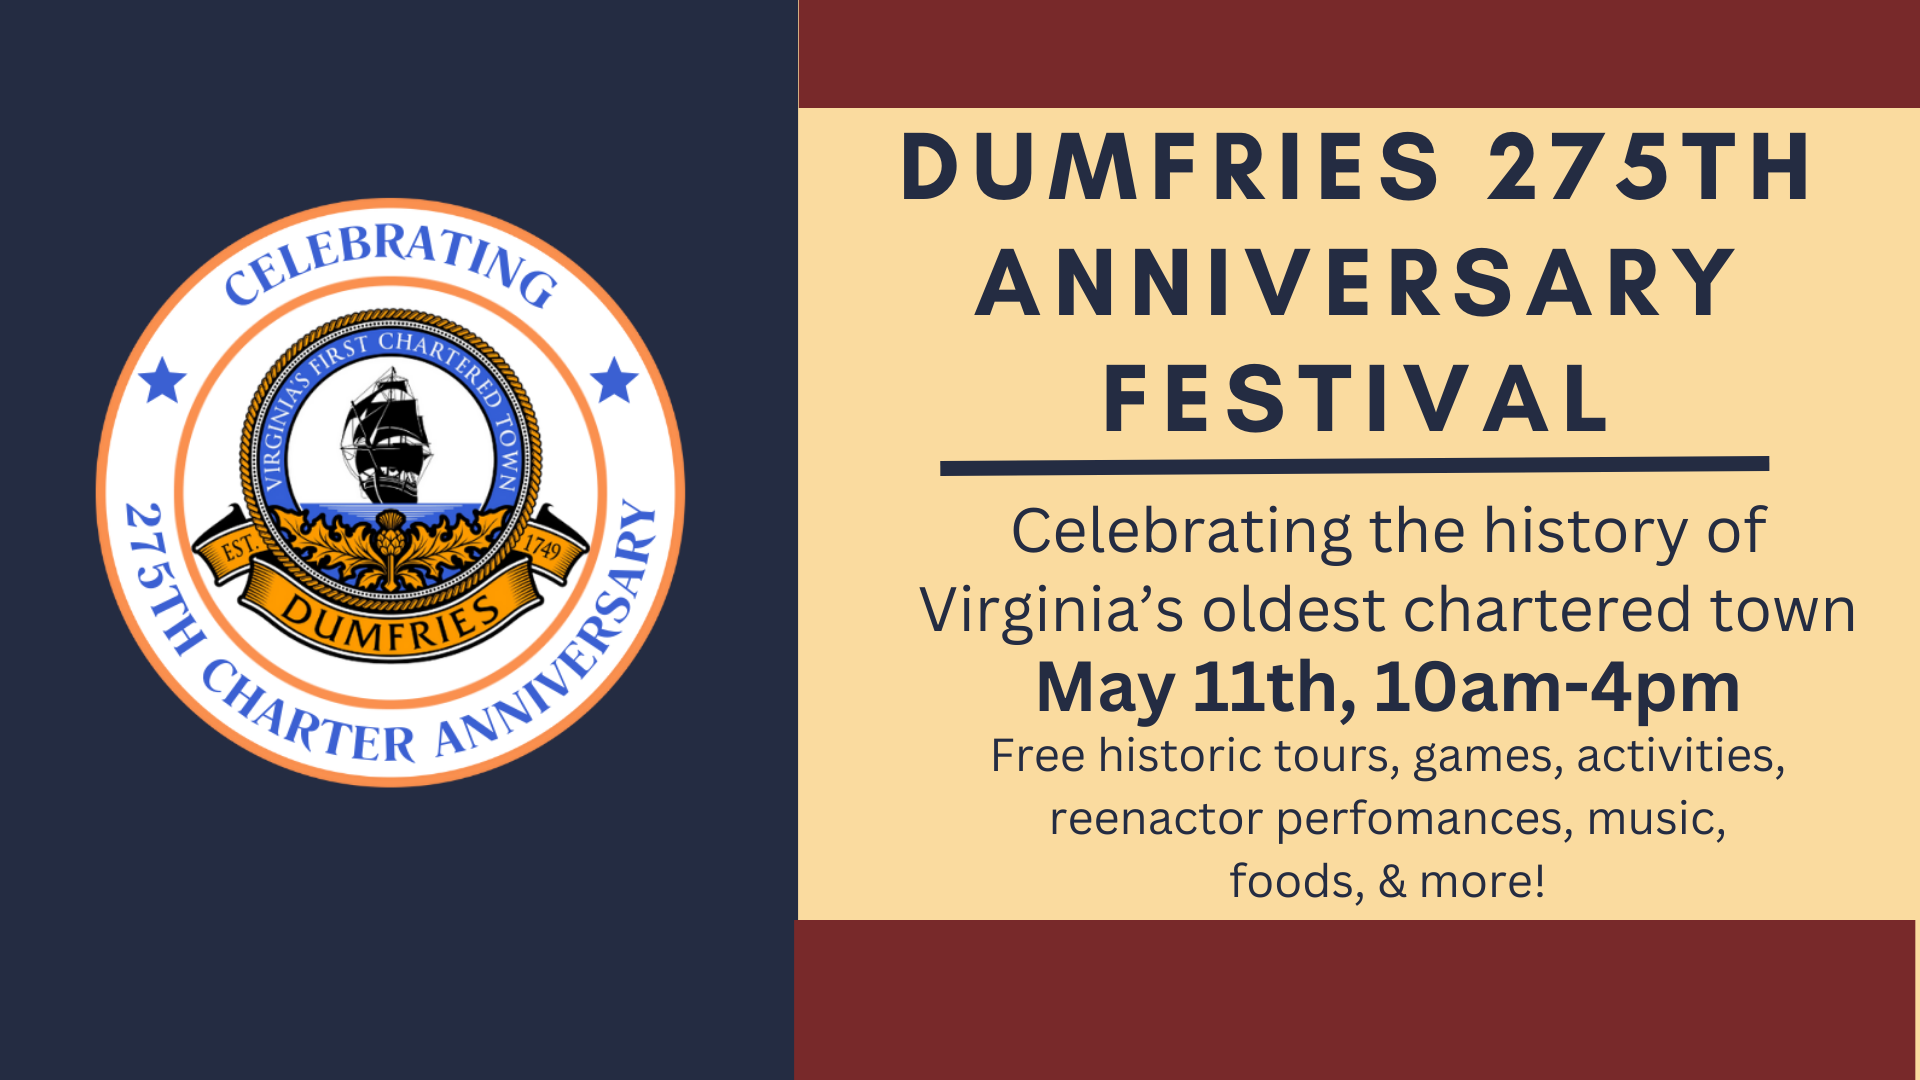 Dumfries 275th Charter Day Anniversary Festival